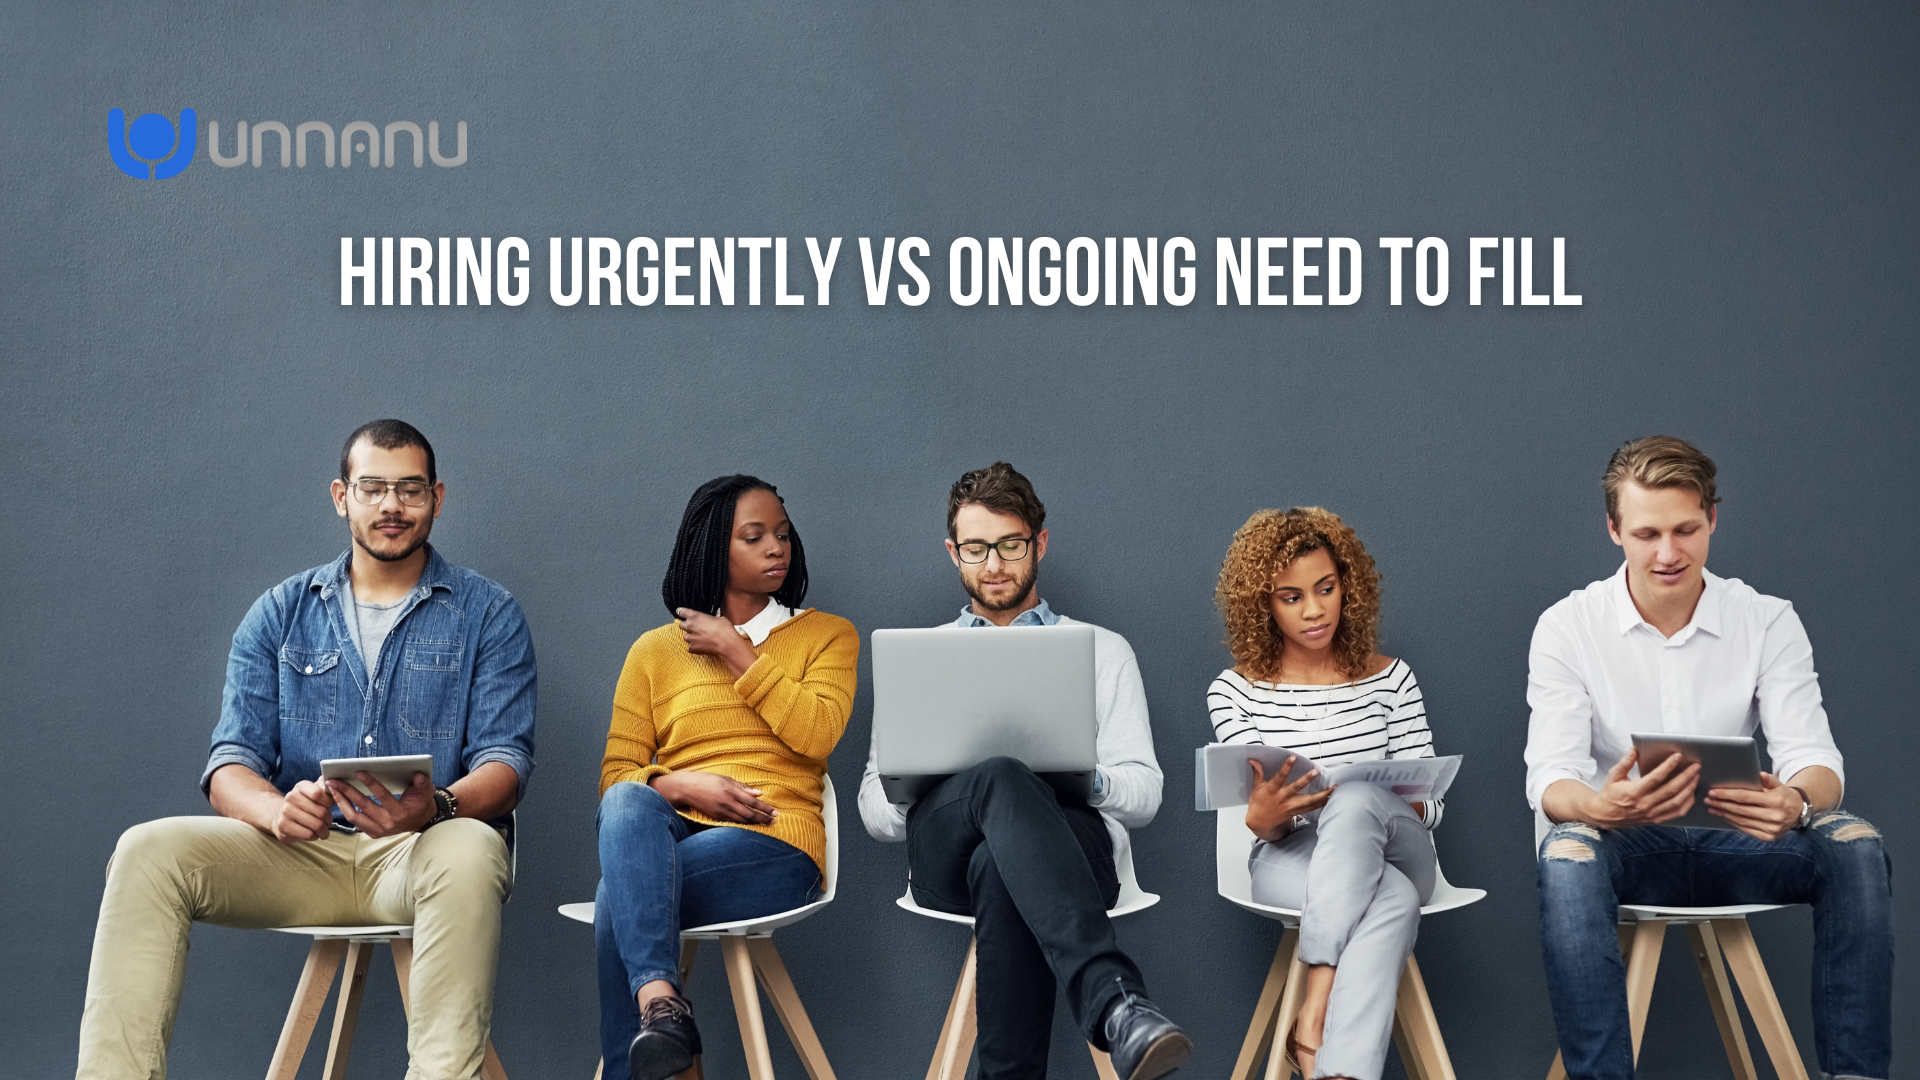 Meaning of ‘Urgently Hiring’ & ‘Ongoing Need to Fill This Role’